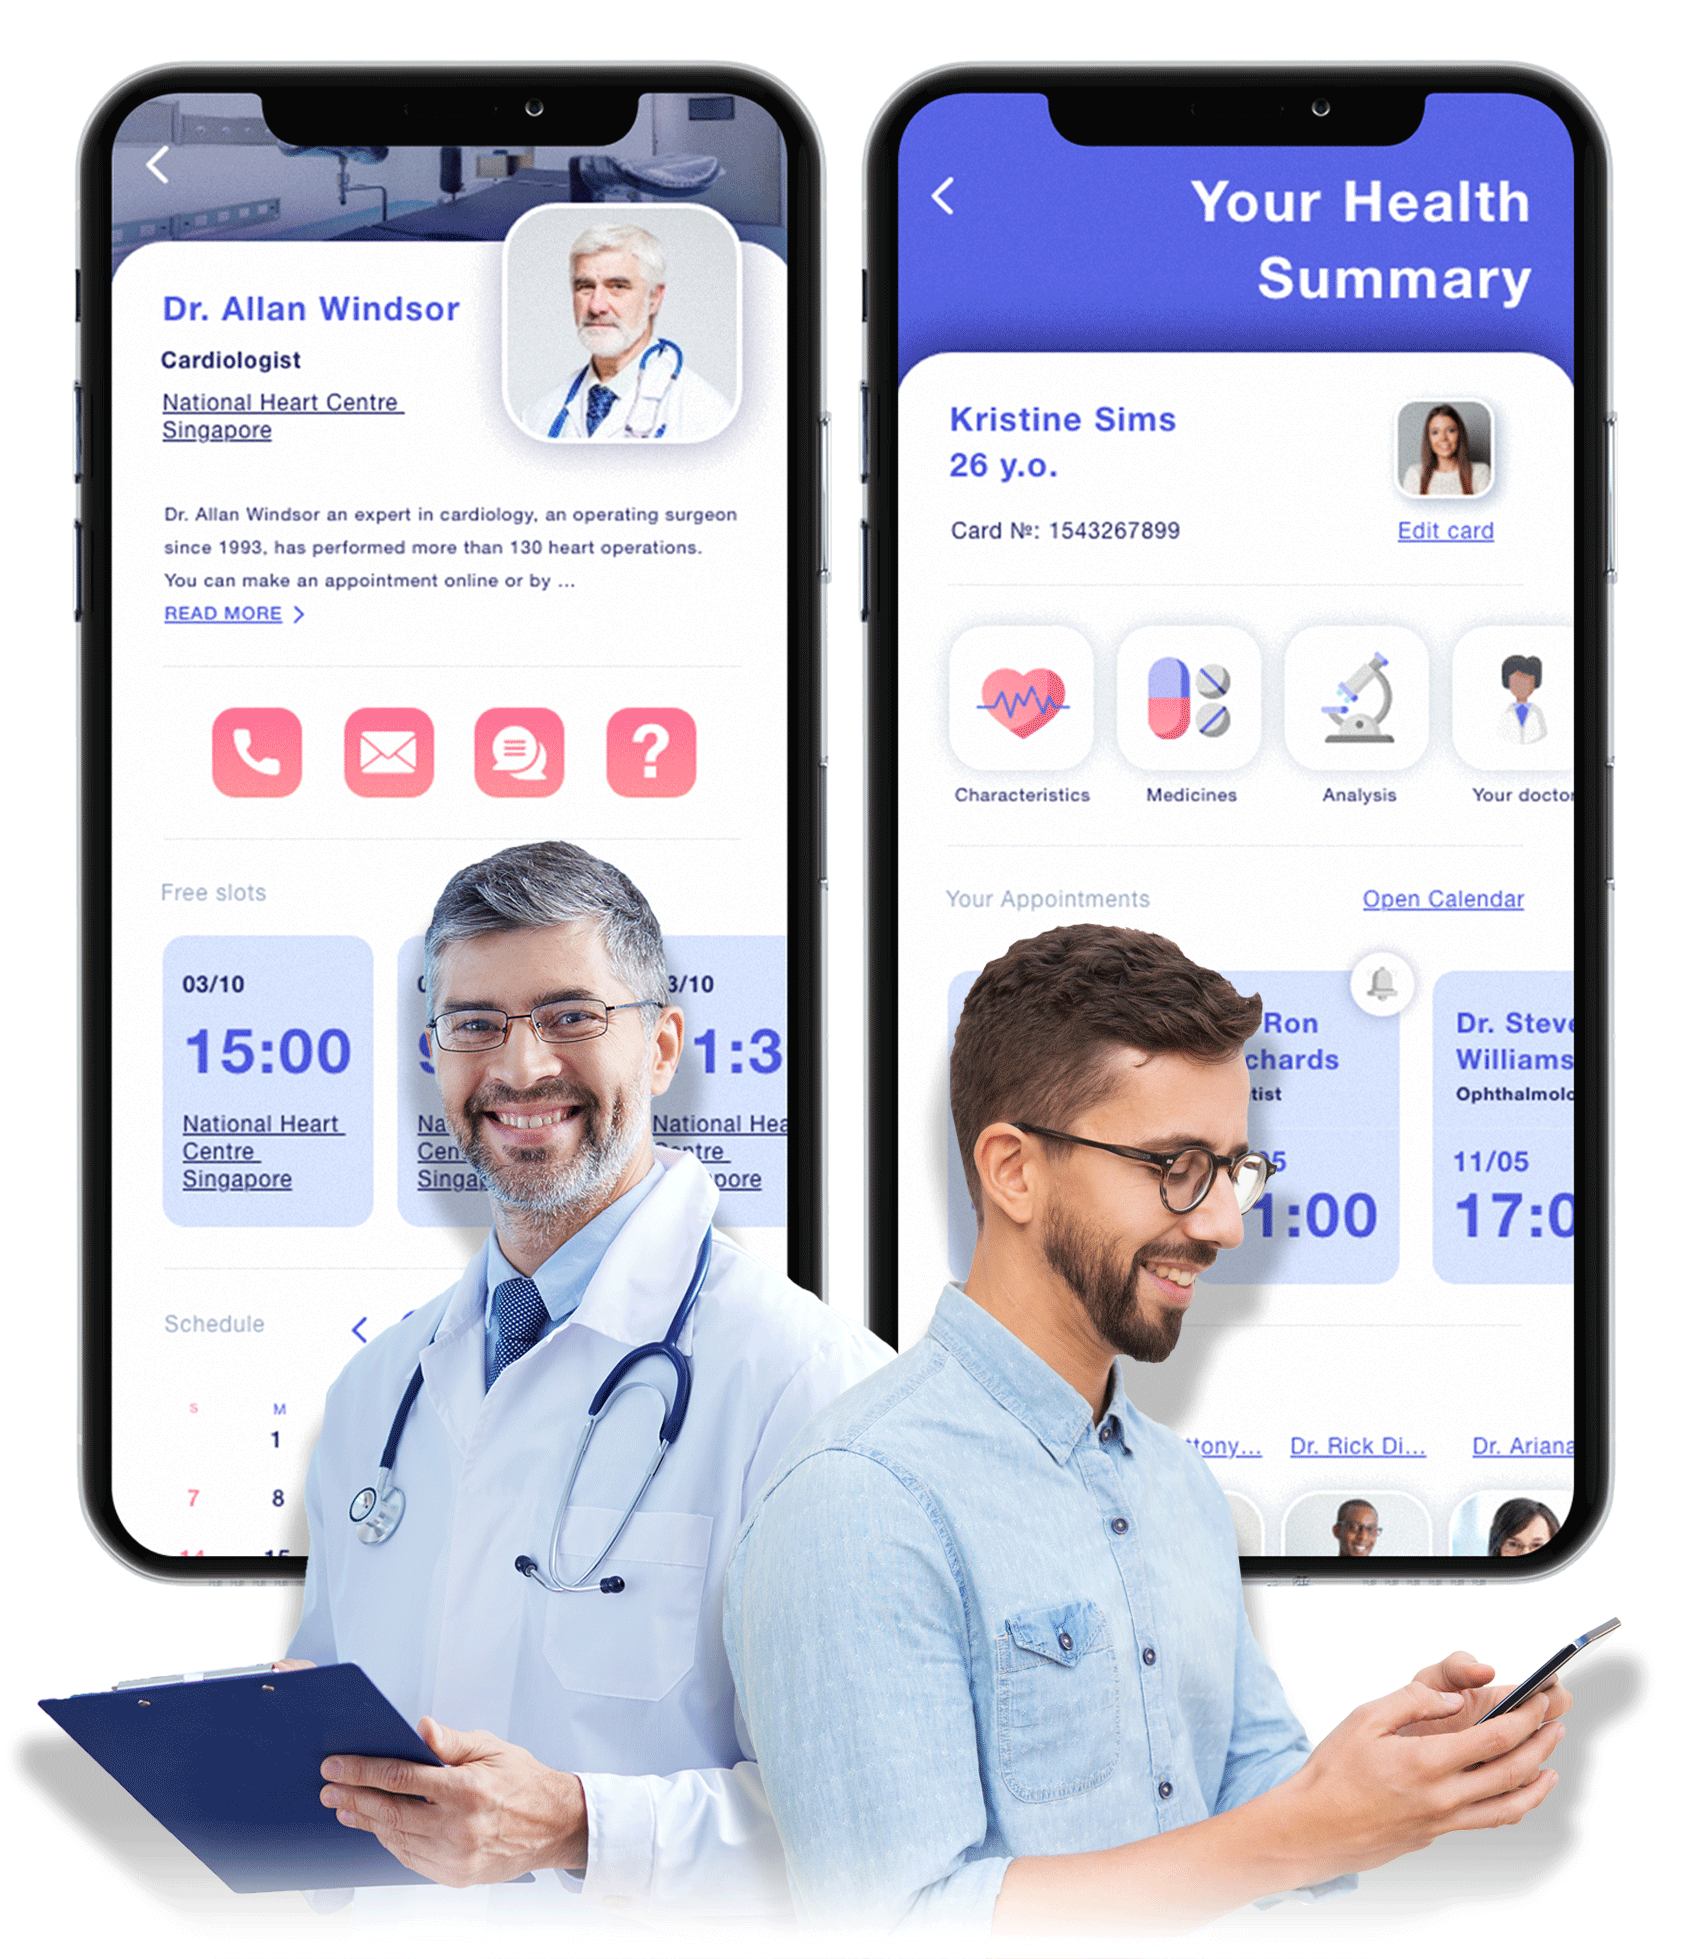 Cross-platform Mobile and Web solutions to integrate patient-doctor interactions and data exchange